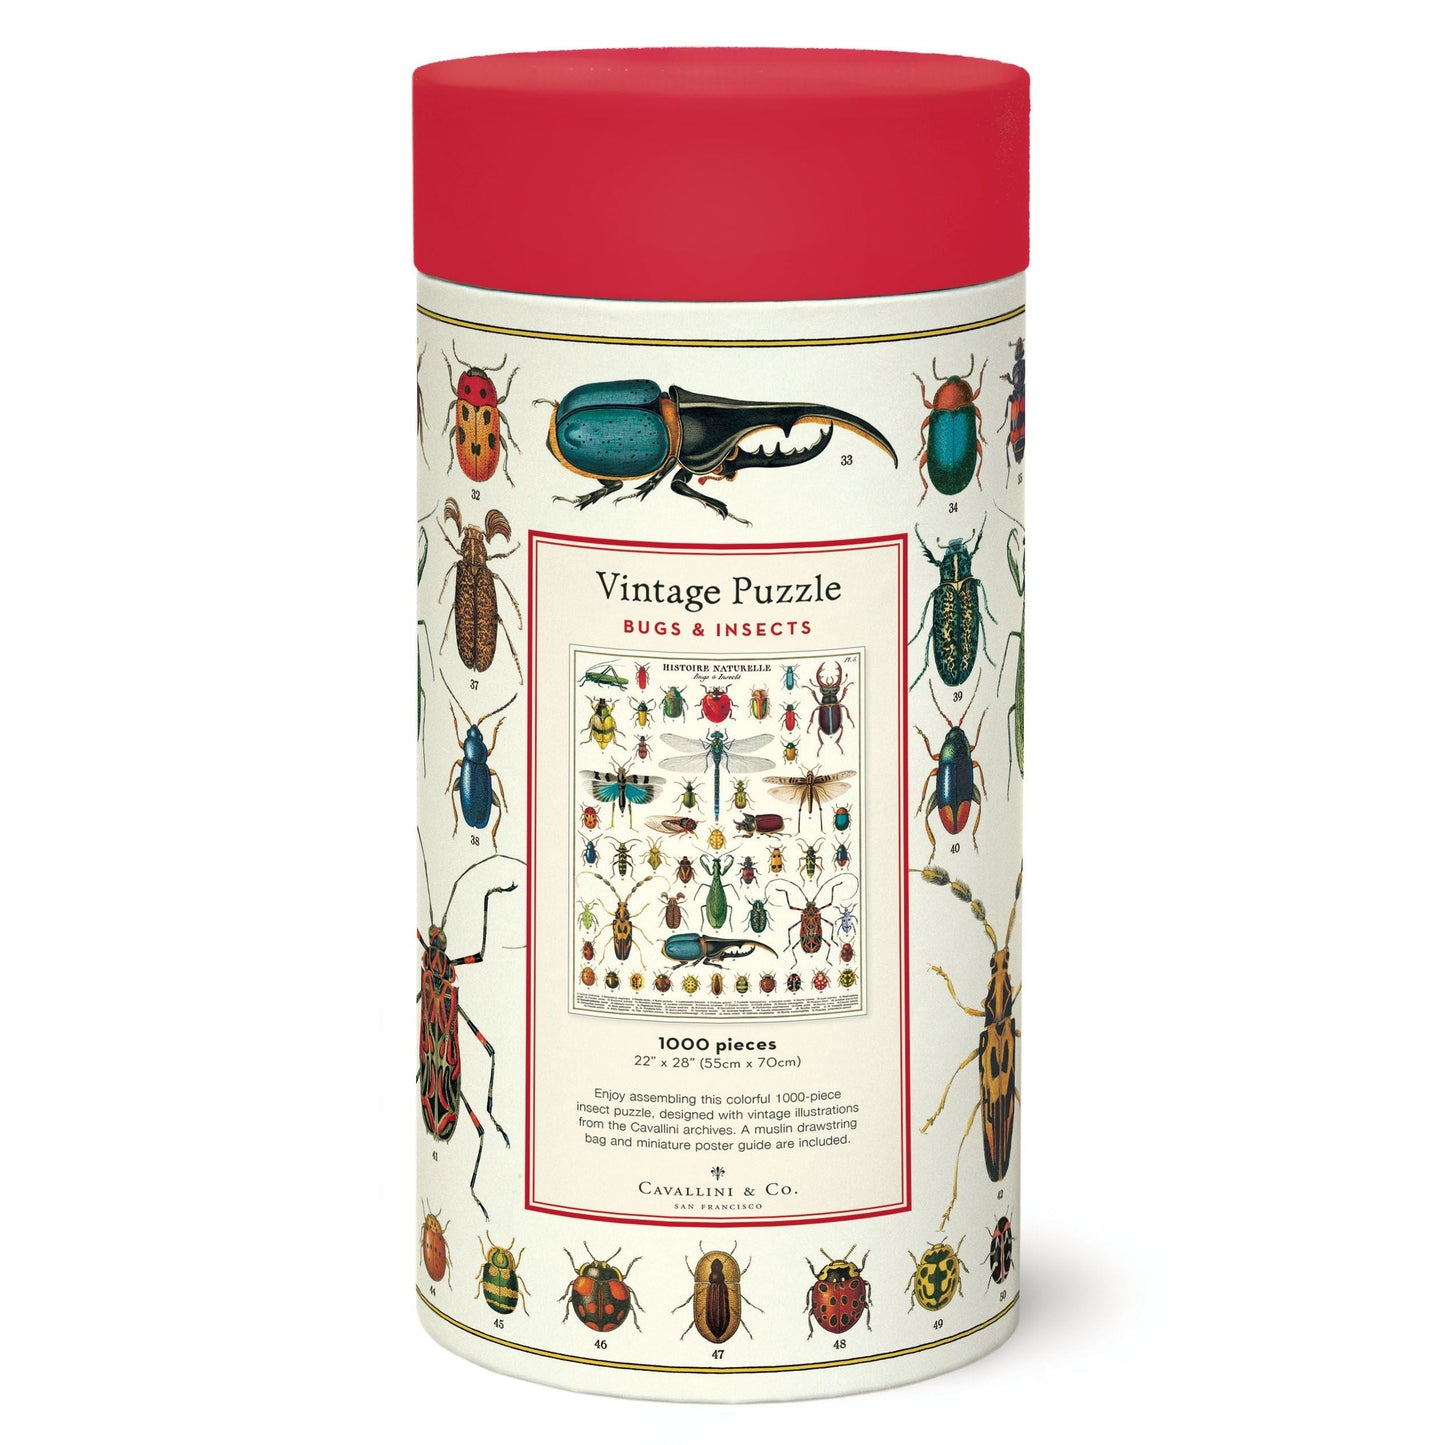 Cavallini & Co. brand puzzle container of bugs and insects style